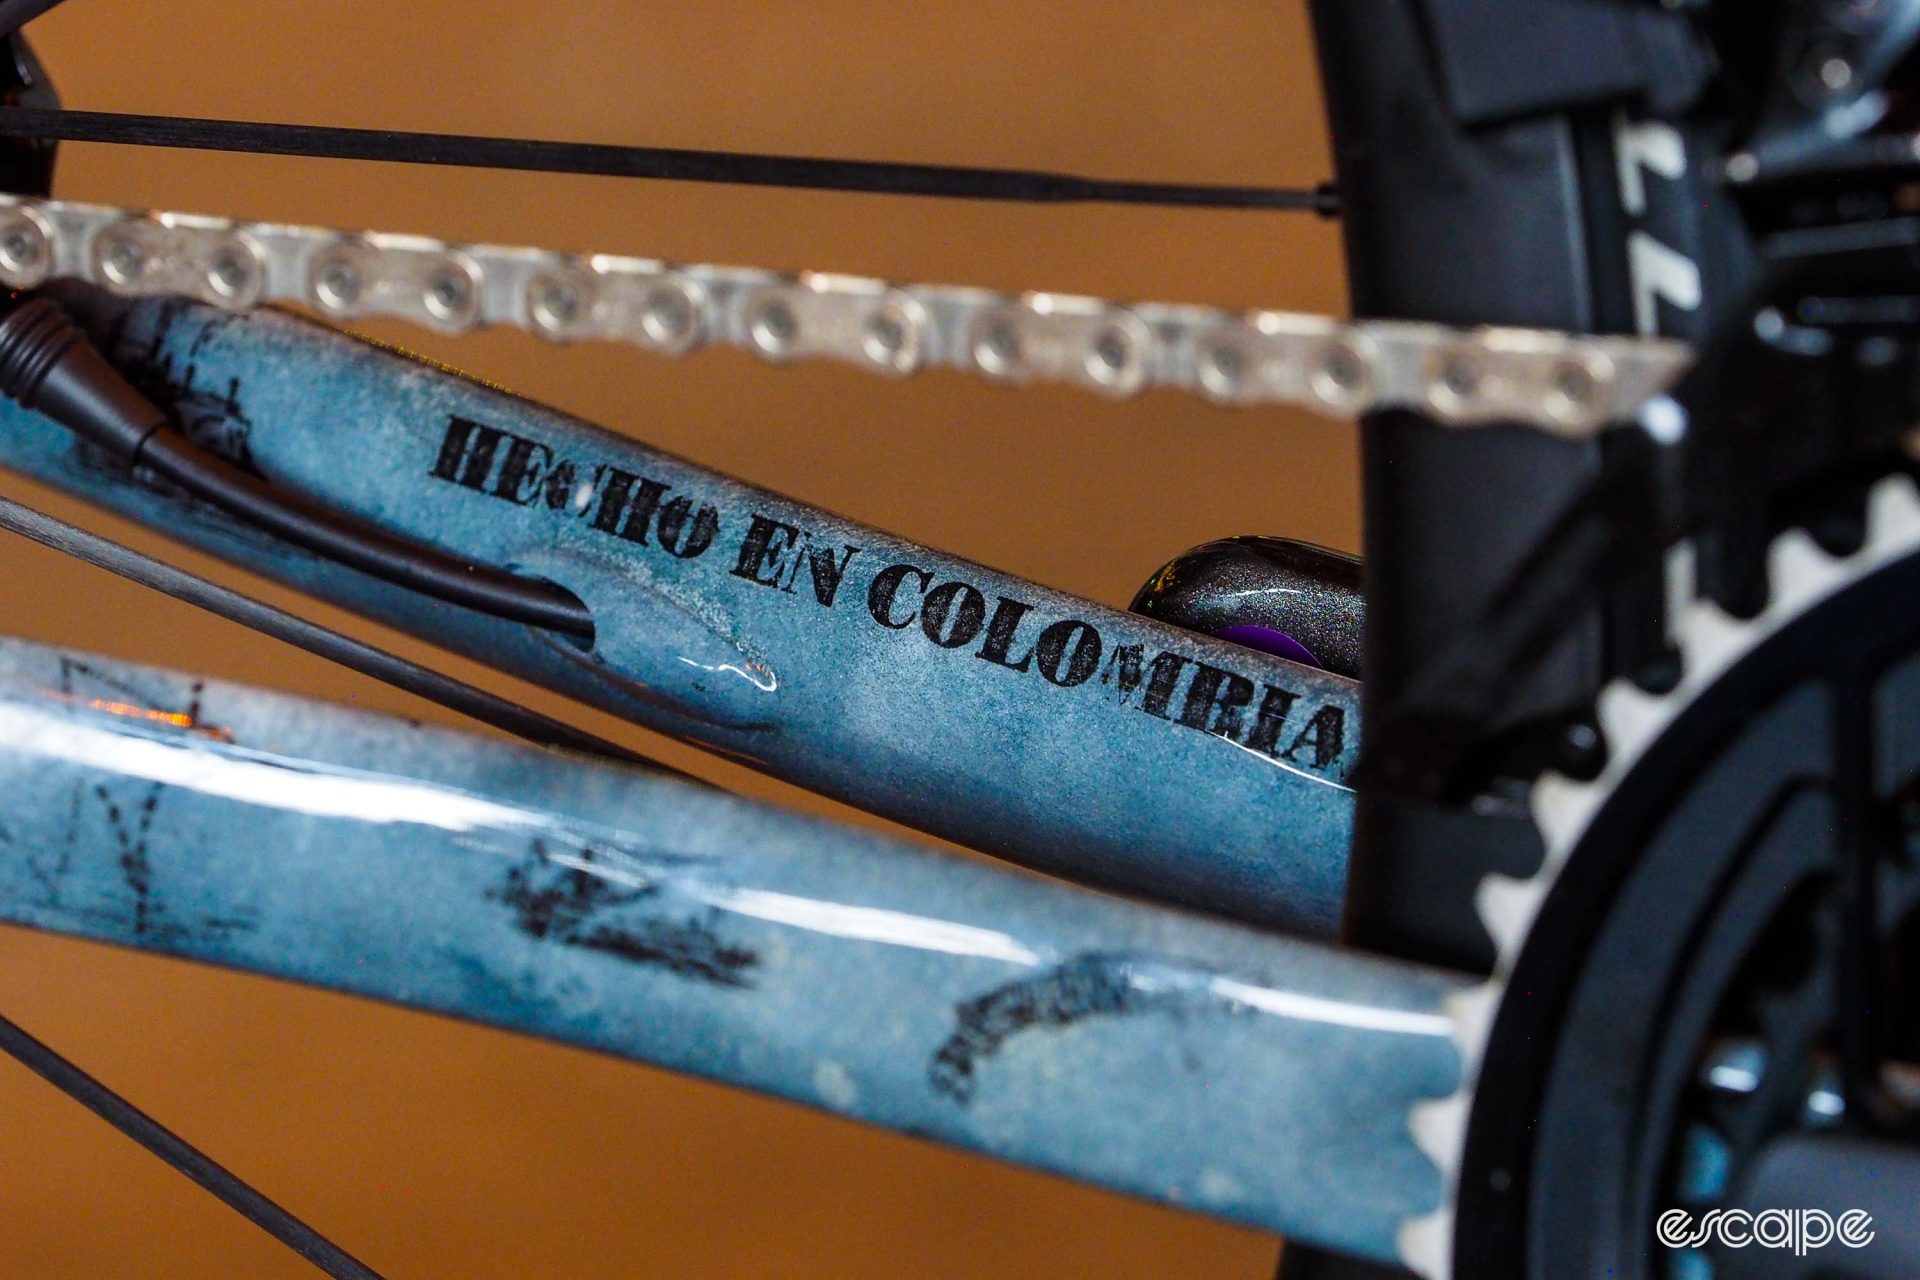 On the inside of the chainstay is a printed marking reading 'Hecho en Colombia' – 'Made in Colombia'. 